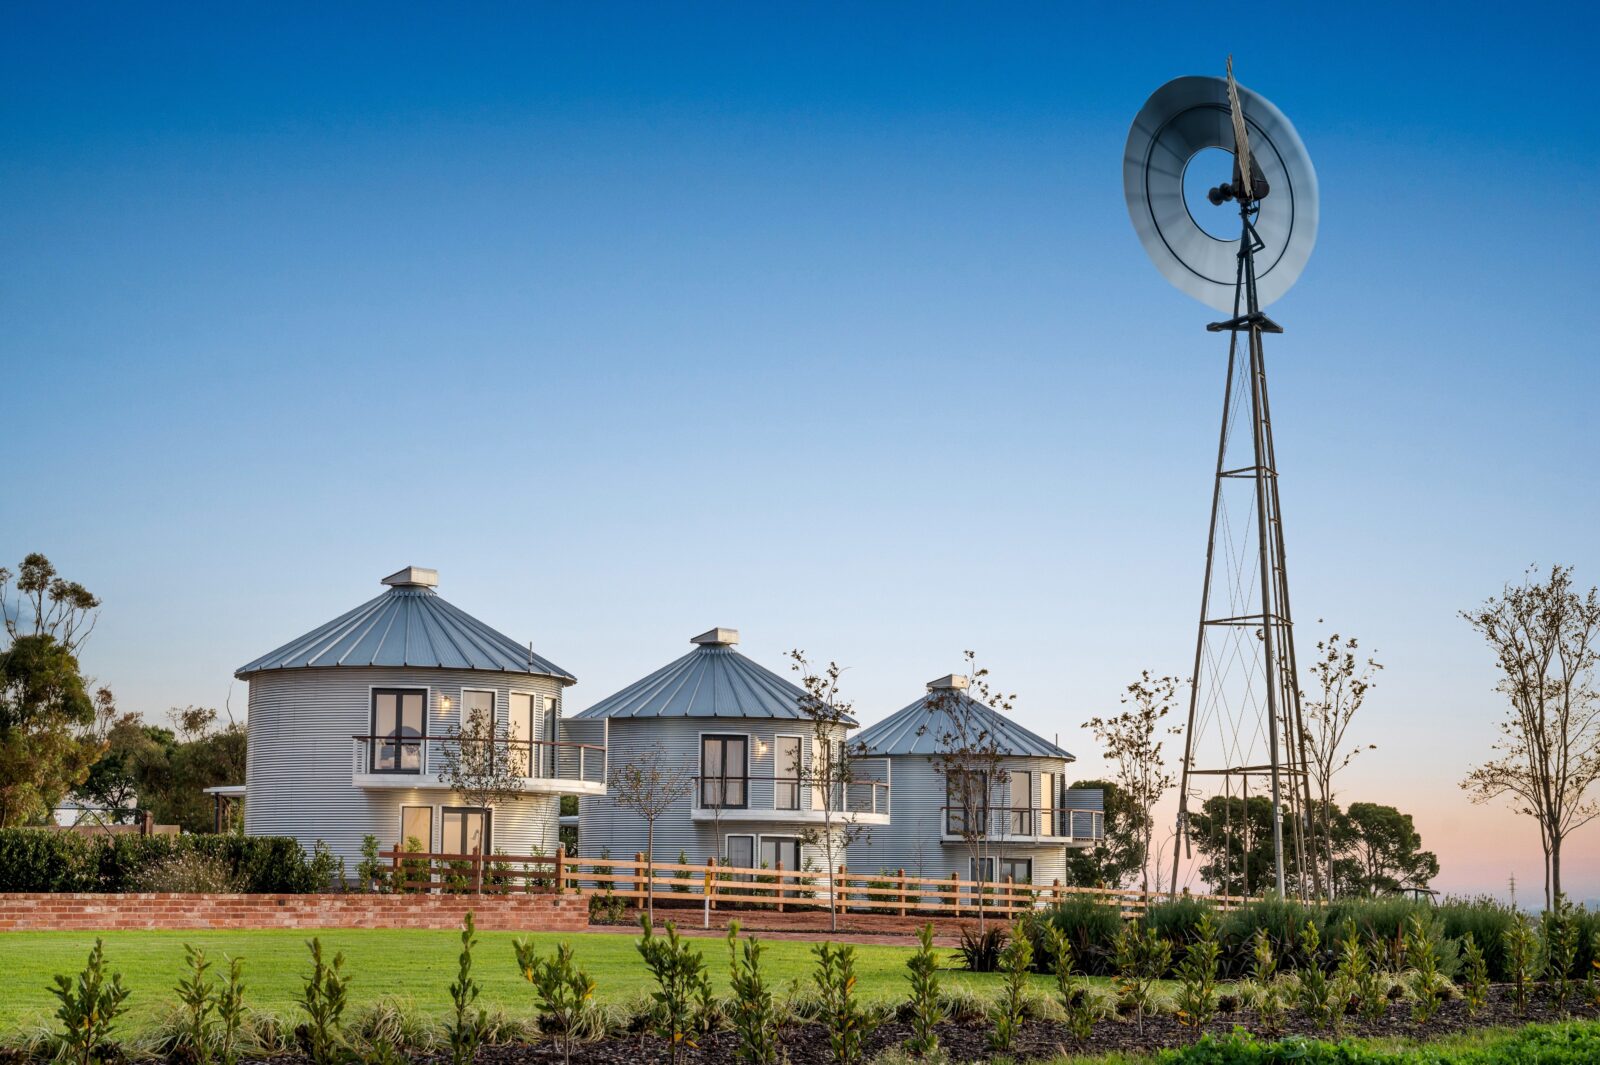 Three Silos, each of which is a boutique apartment. Balconies overlooking fields and windmill.